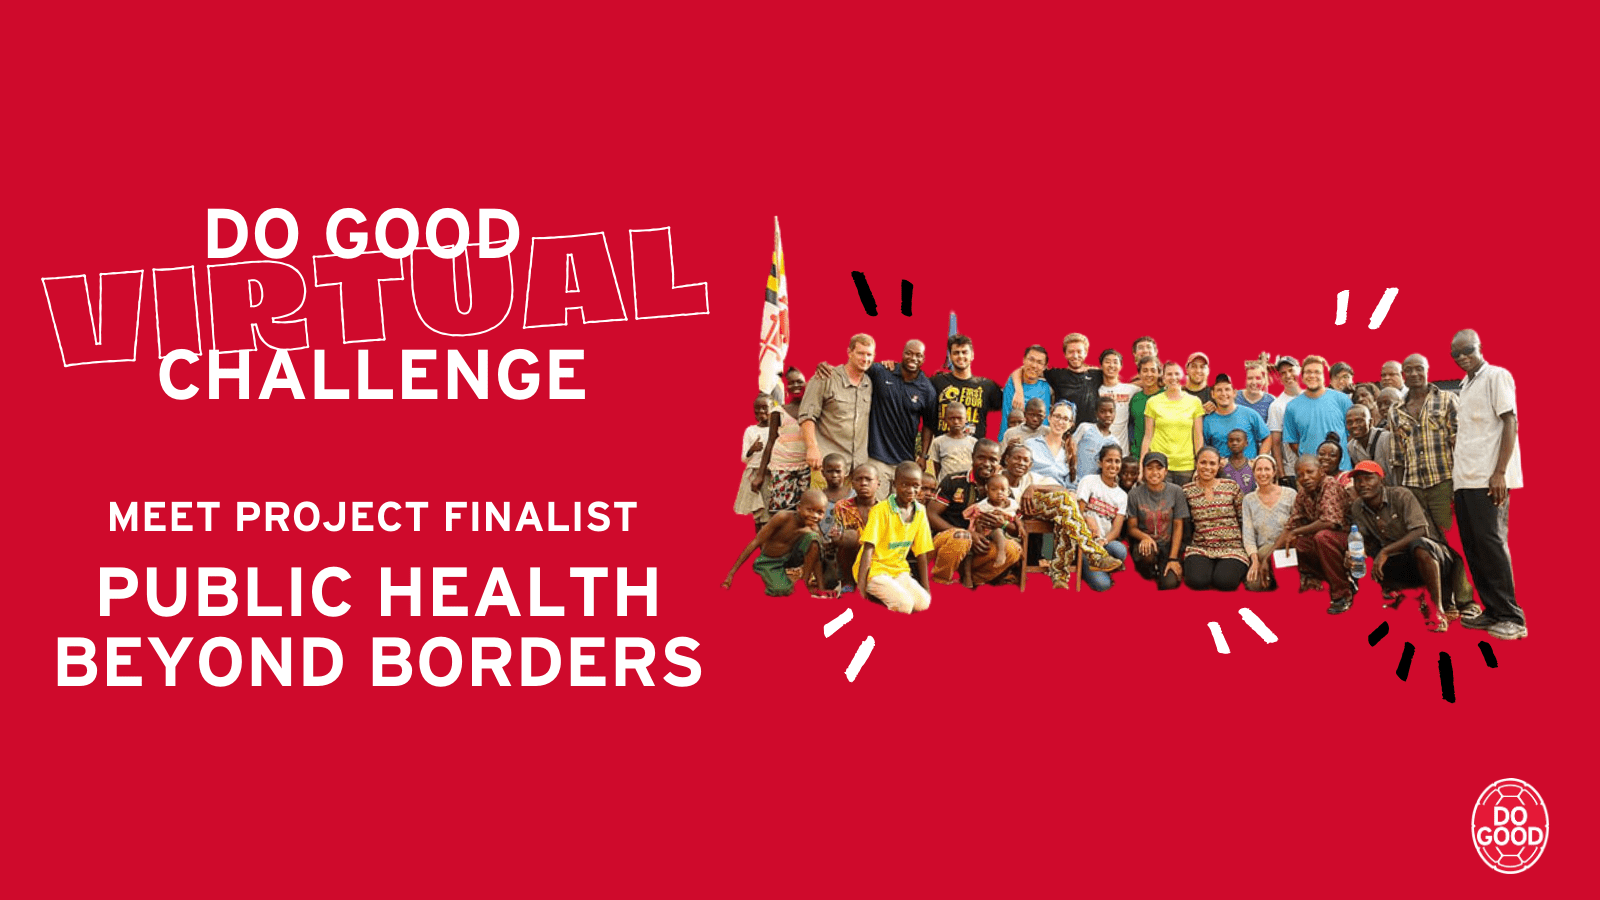 Do Good Challenge 2021 Public Health Beyond Borders from the University of Maryland